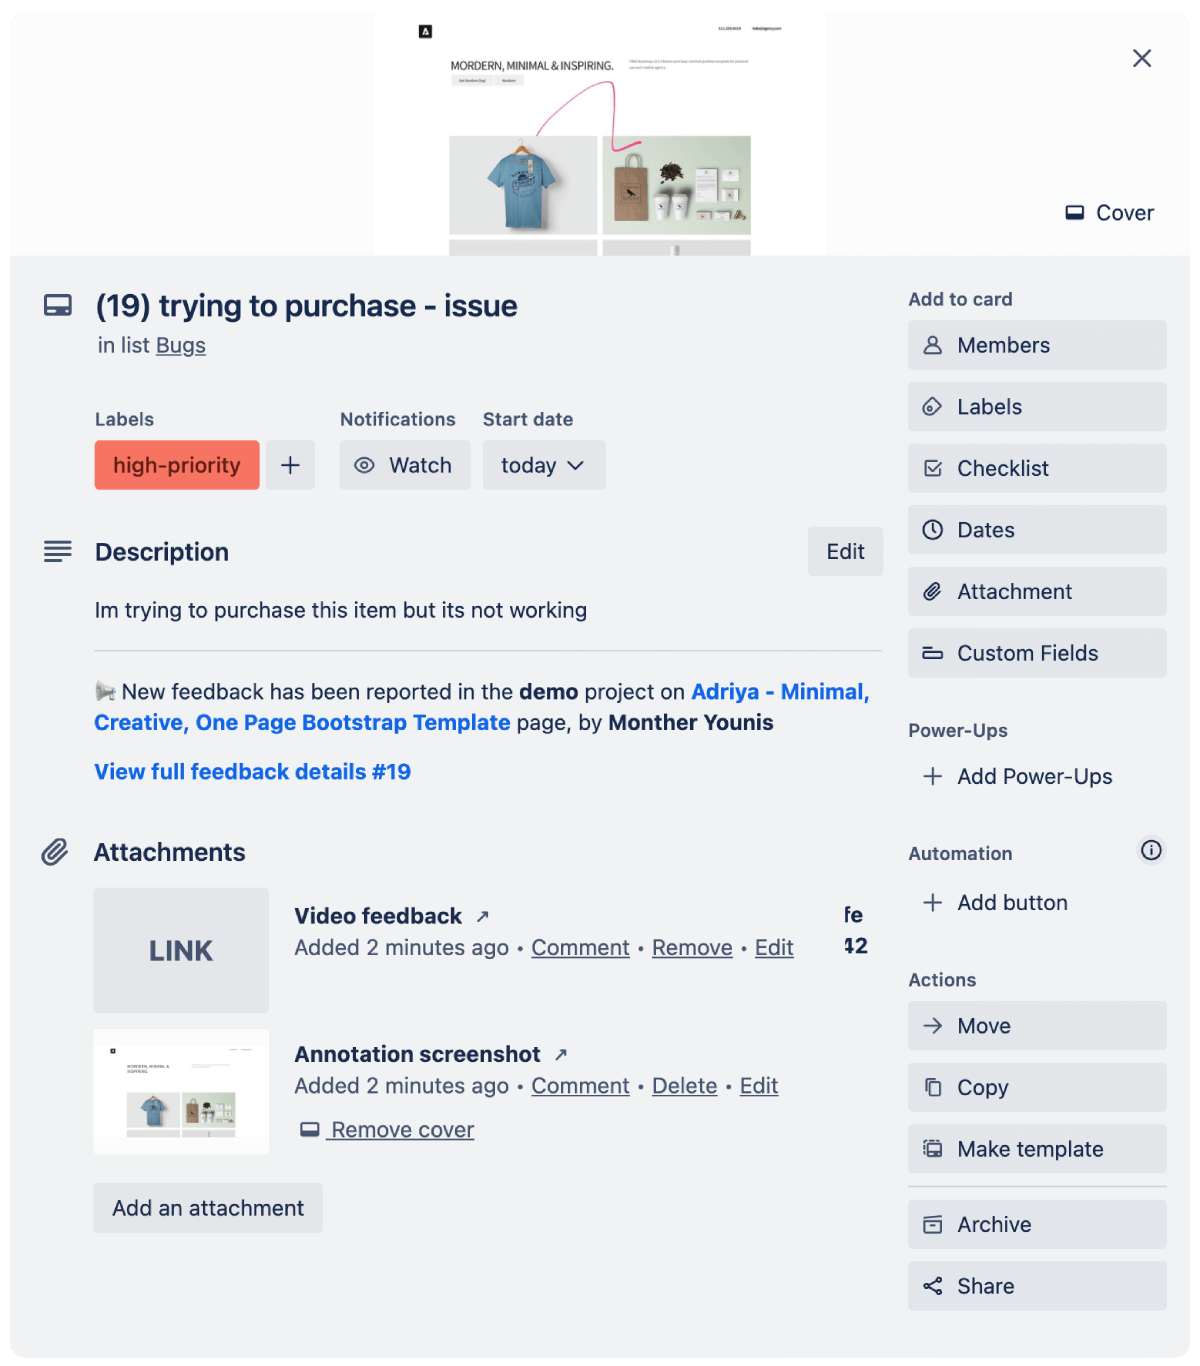 Customer feedback by klynd on Trello with an annotated screenshot, video attached with more feedback details